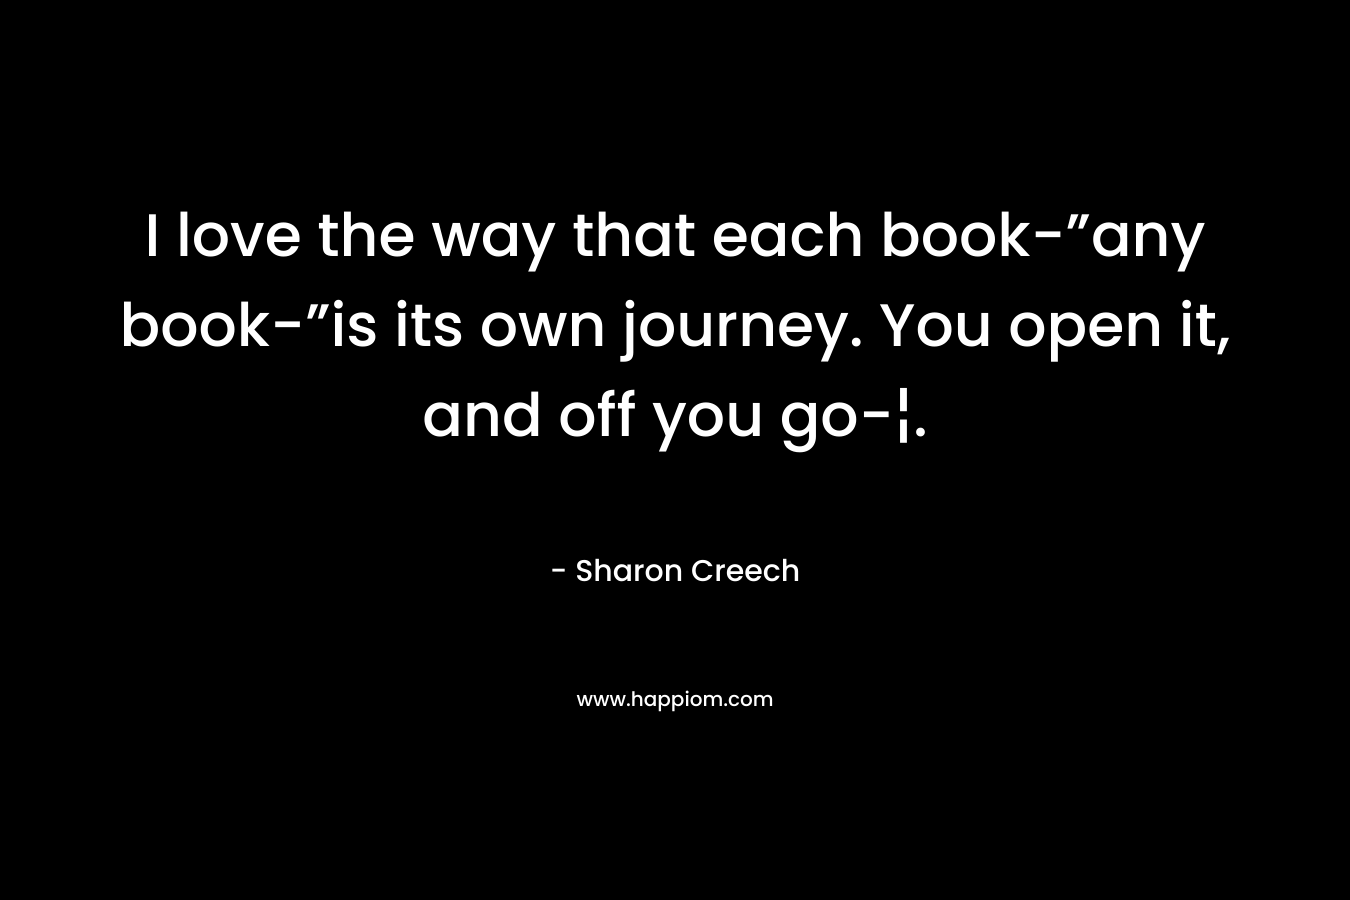 I love the way that each book-”any book-”is its own journey. You open it, and off you go-¦.